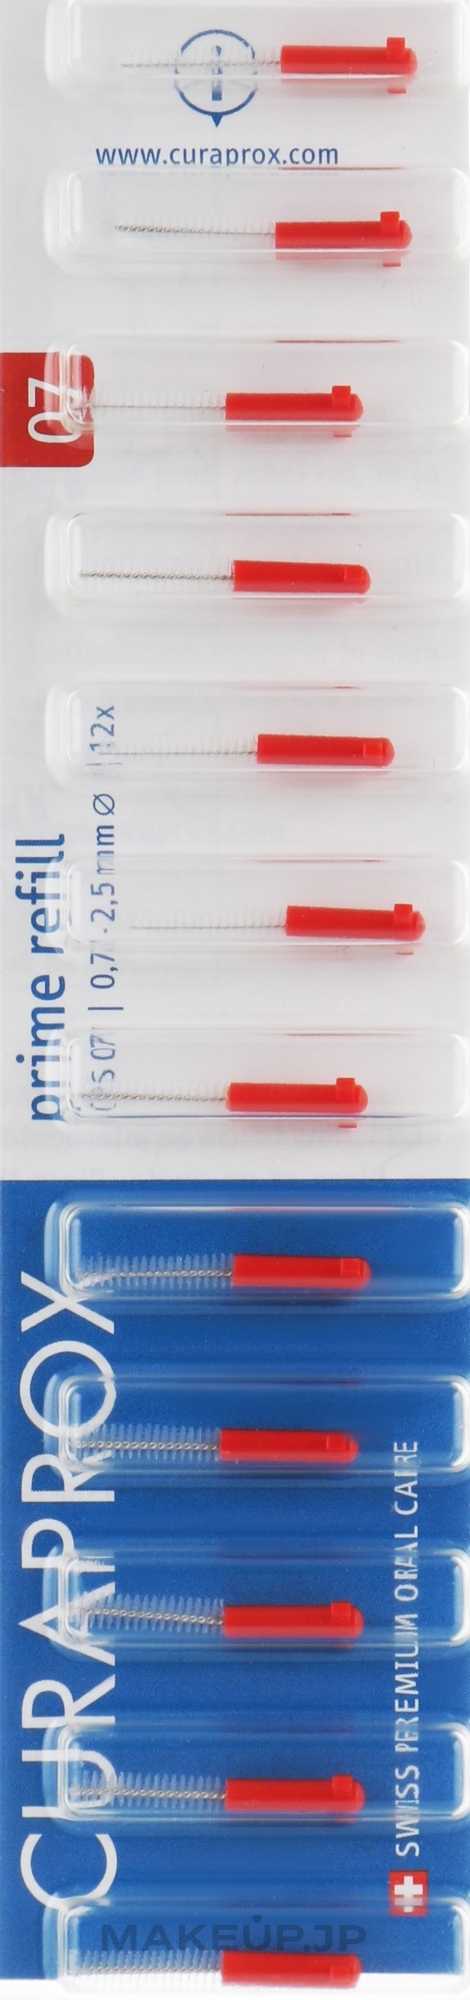 Brush Set "Prime Refill" without holder, 0.7 mm, CPS 07 - Curaprox — photo 8 szt.